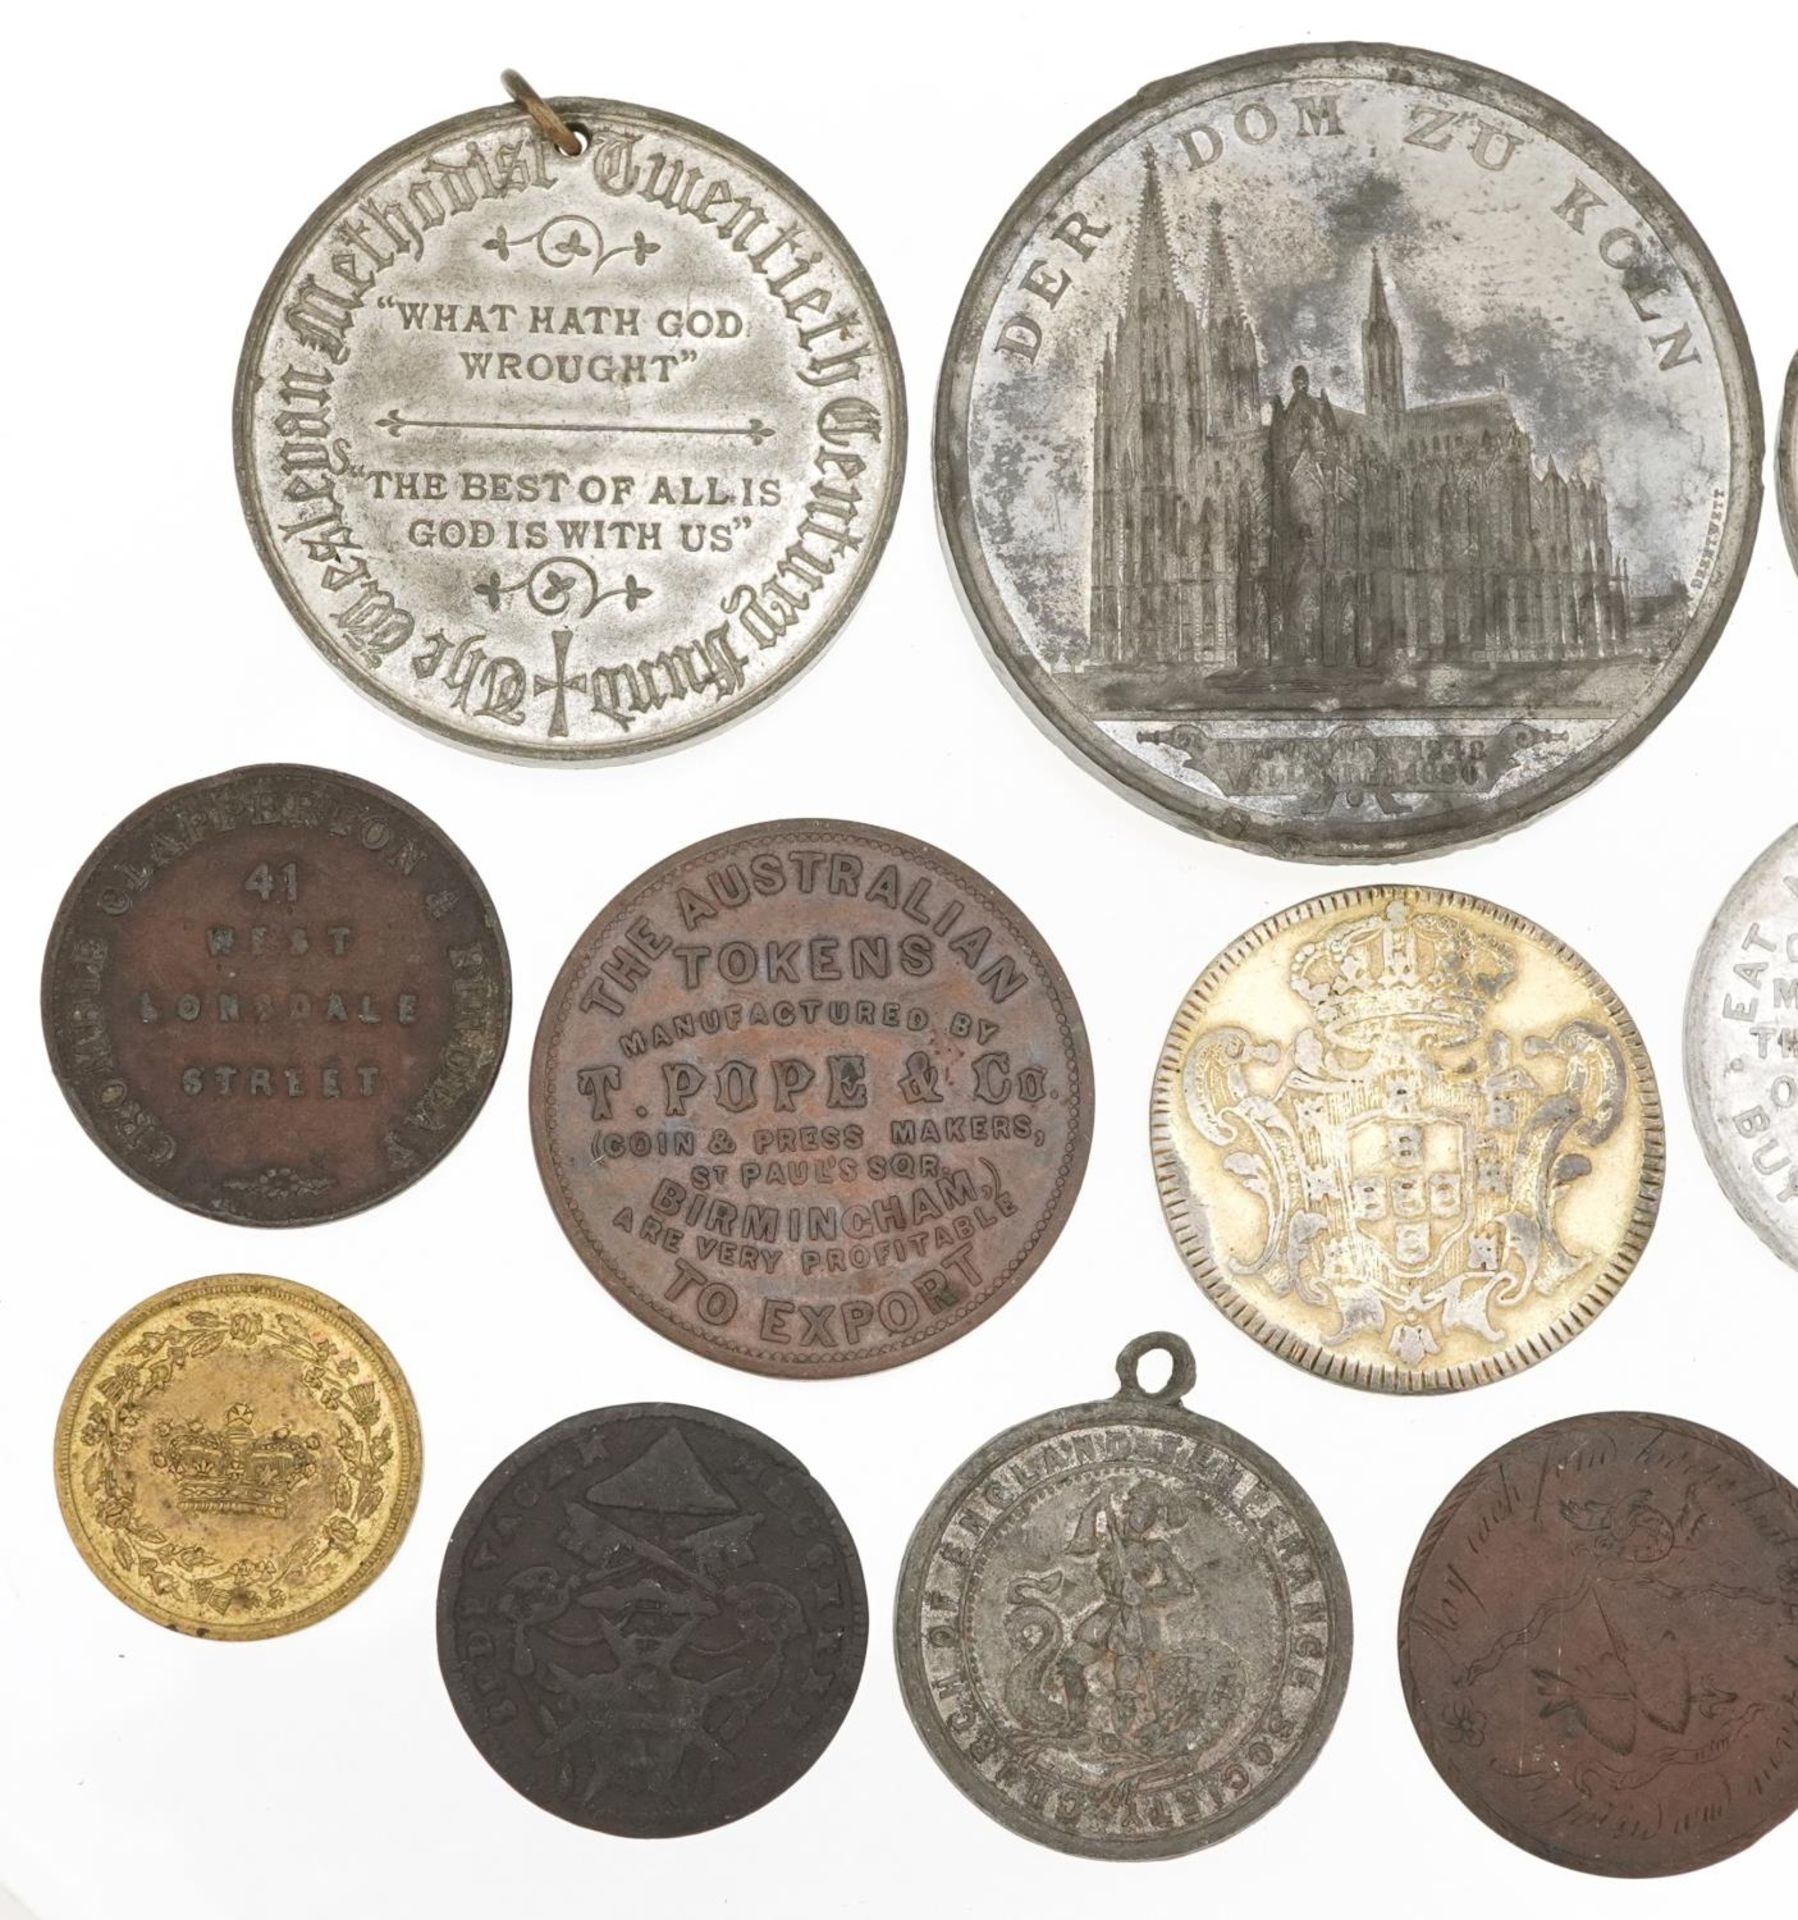 18th century and later coinage and tokens including Johannes Pirate coin, Australian token - Image 5 of 6